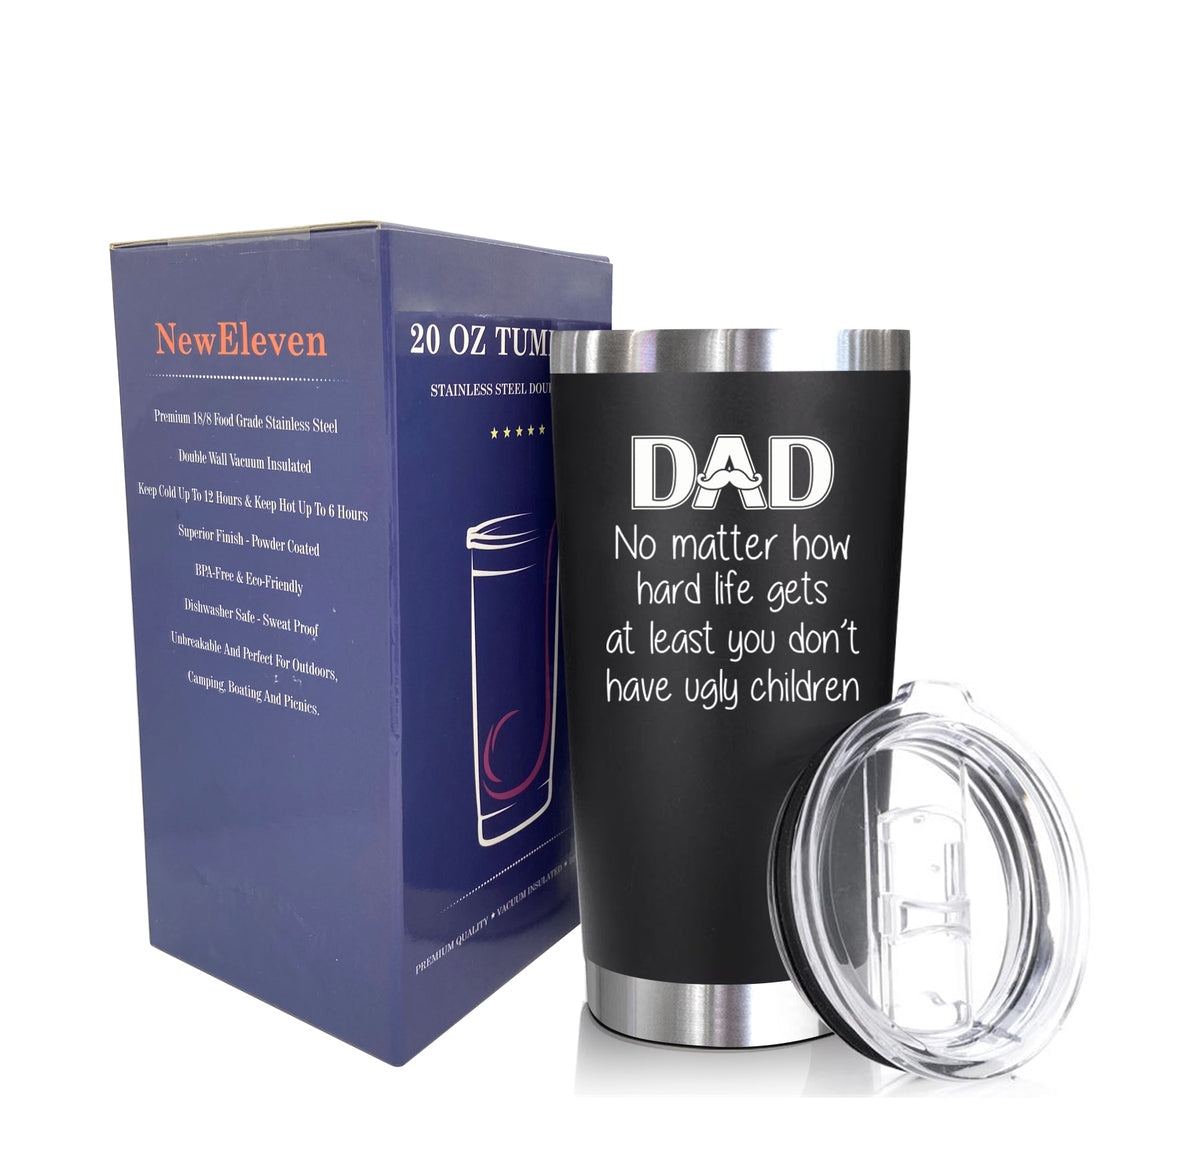 Stainless Steel 8 oz. Tumblers, Great for Kids!